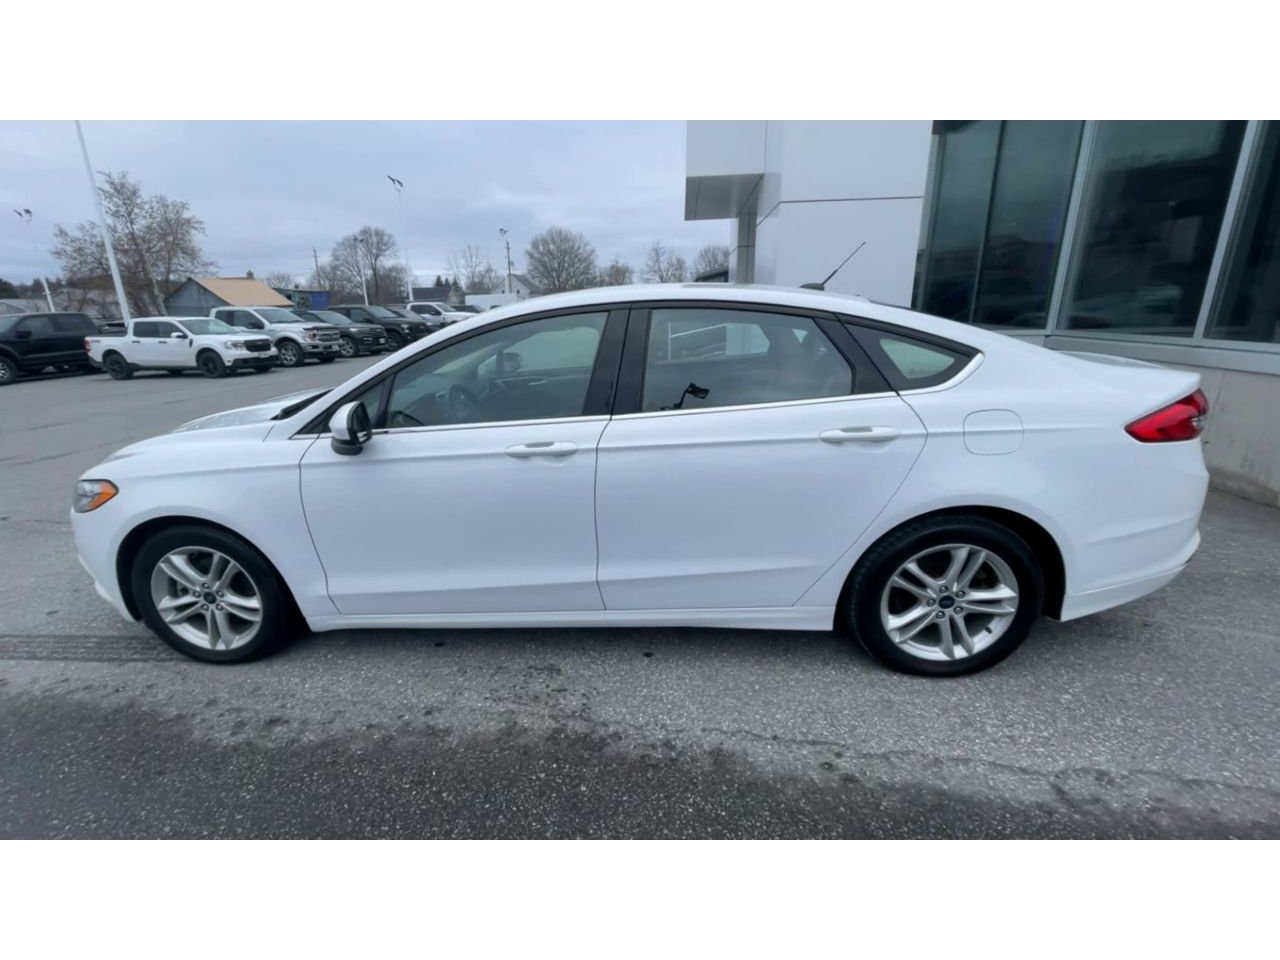 2018 Ford Fusion - P21087 Full Image 6